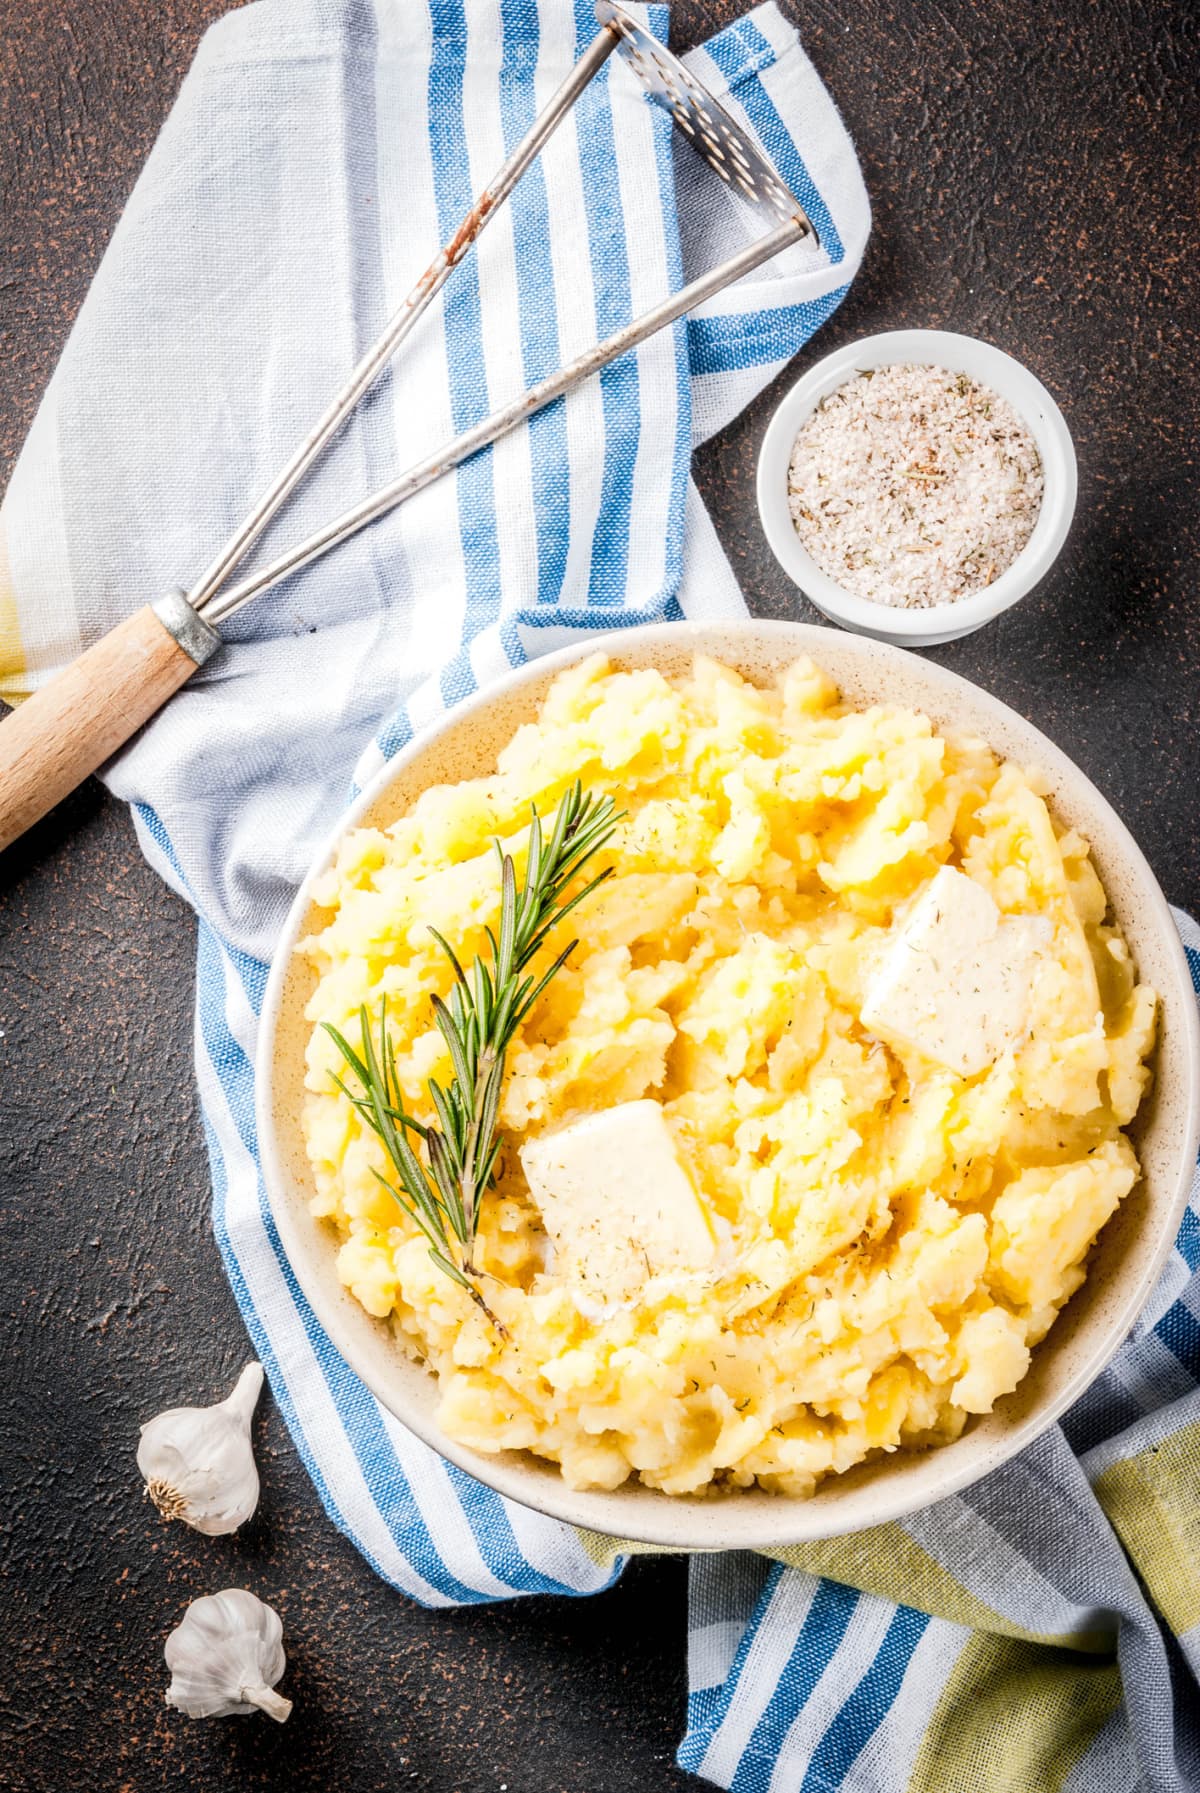 A bowl of mashed potatoes with butter and herbs beside a masher and bowl of seasonings